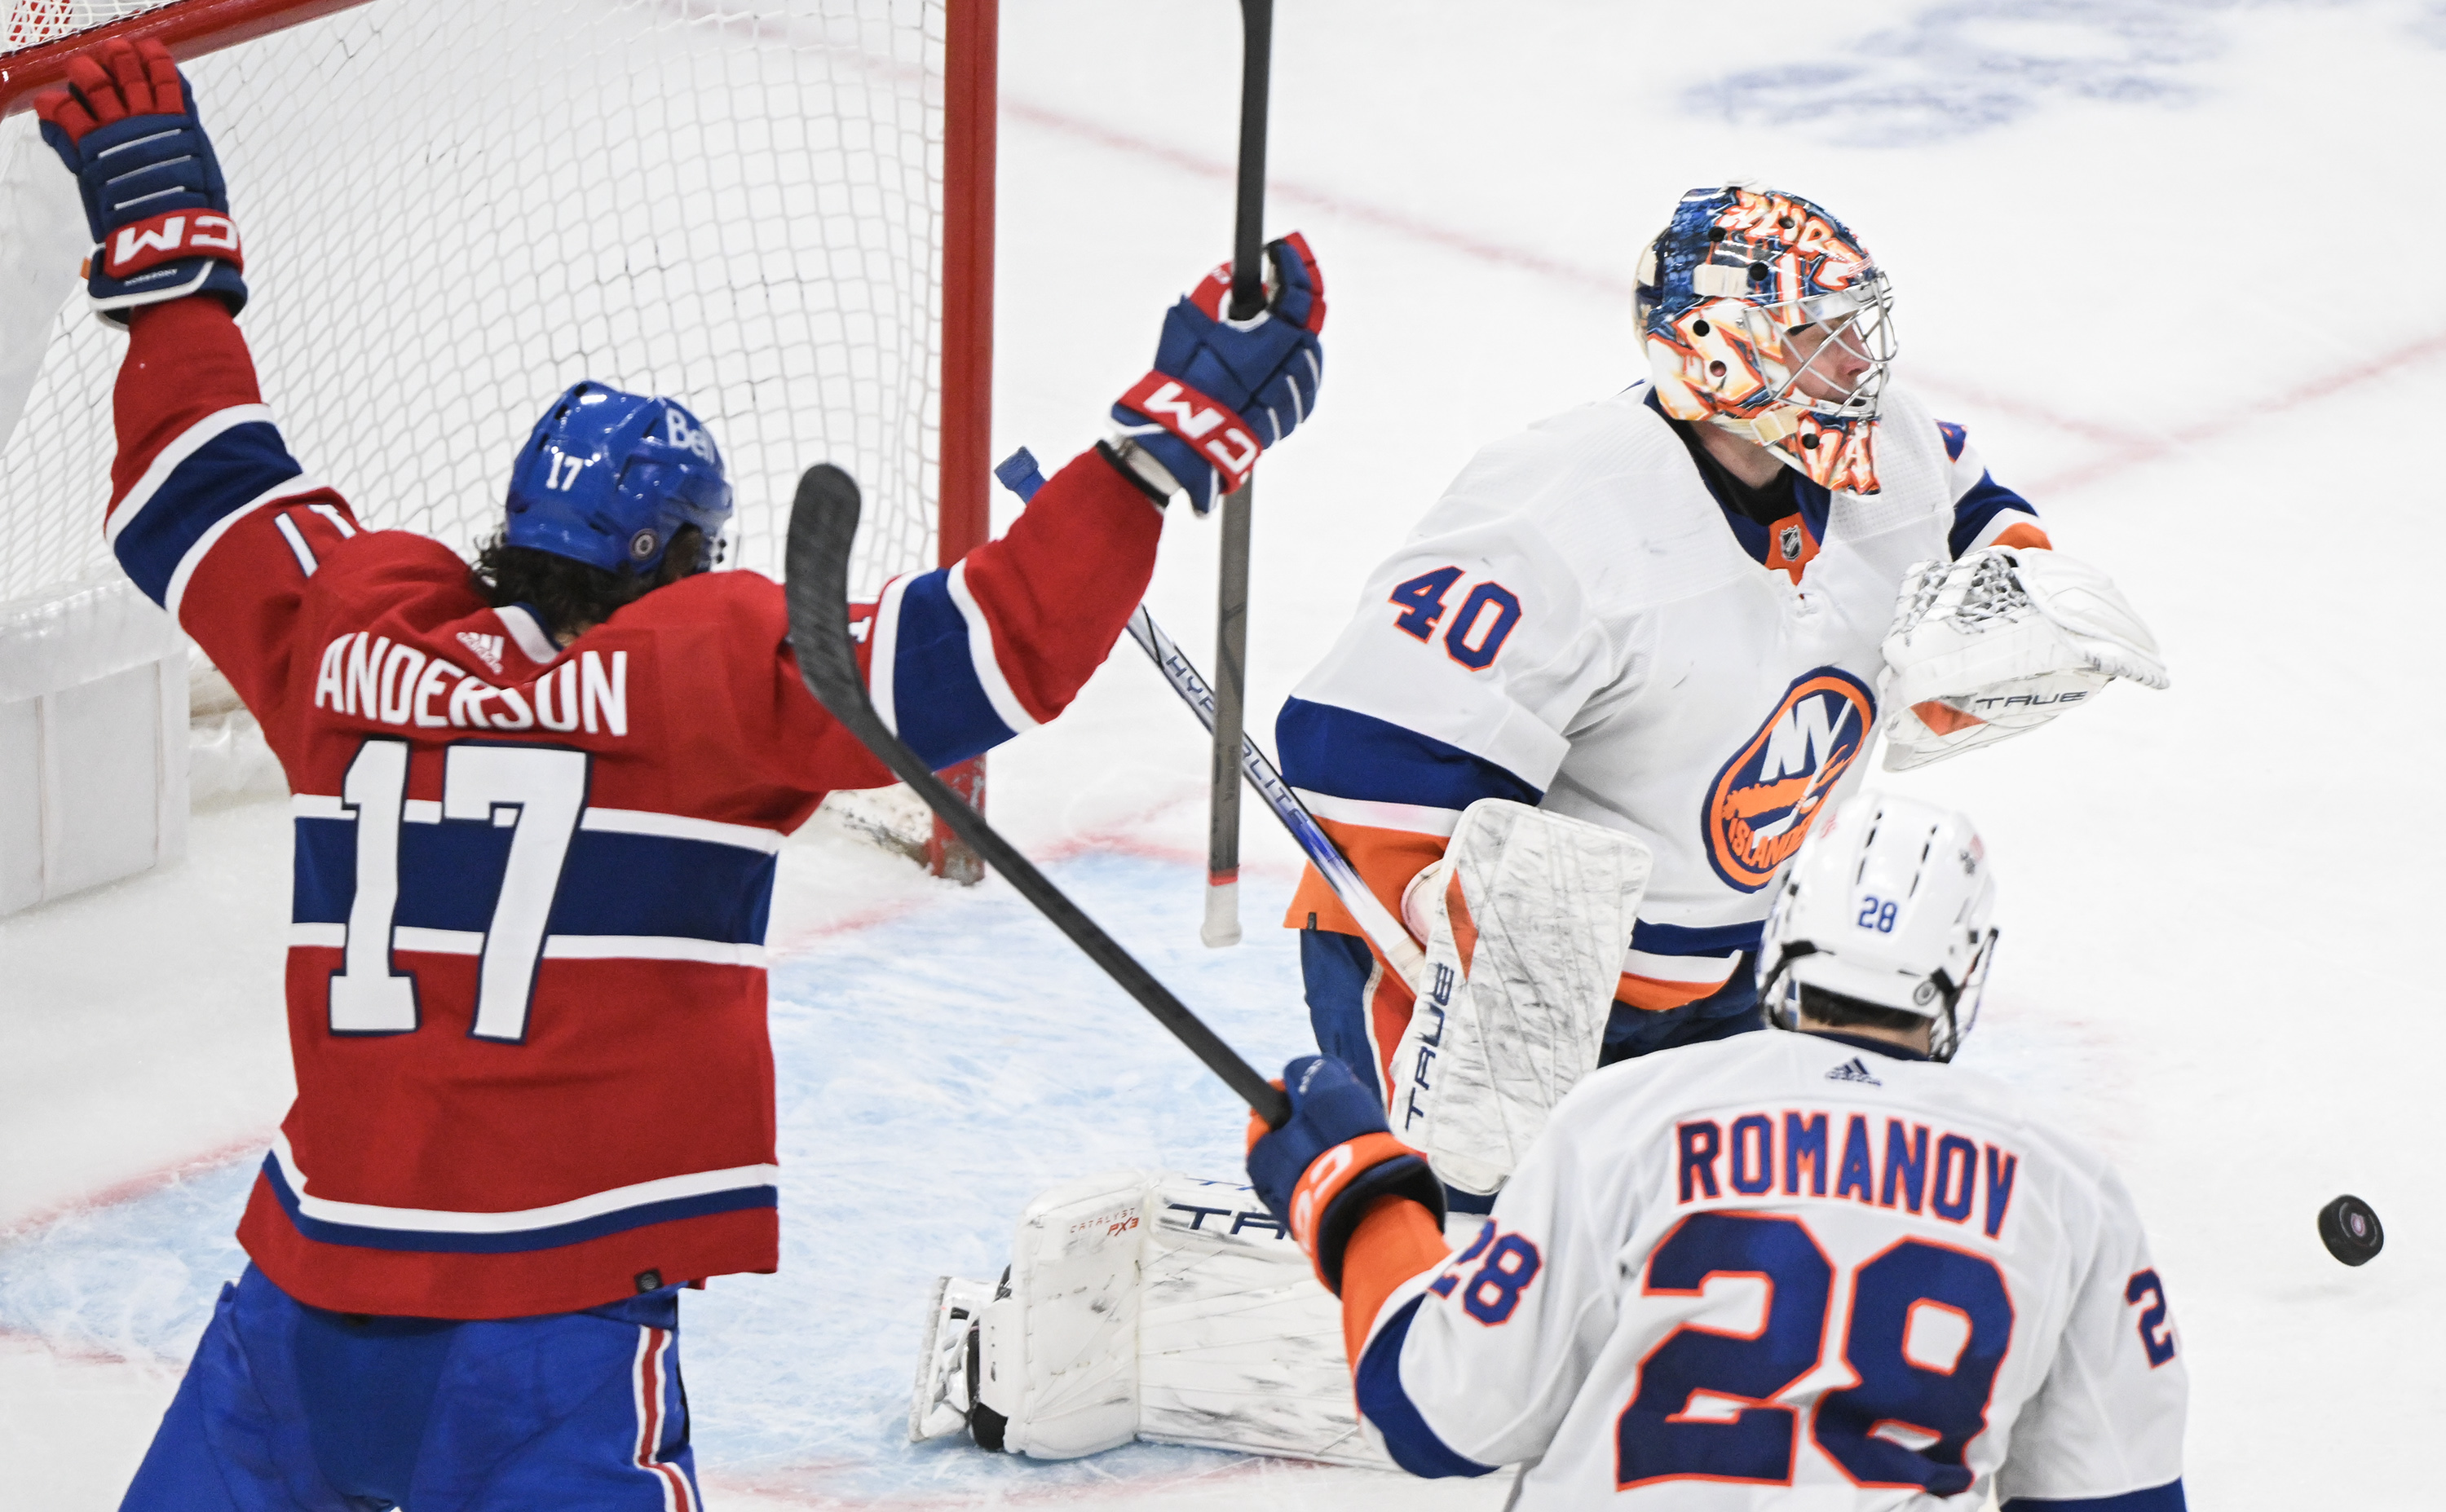 Call of the Wilde: Montreal Canadiens hold on, shade New York Islanders with 4-3 win